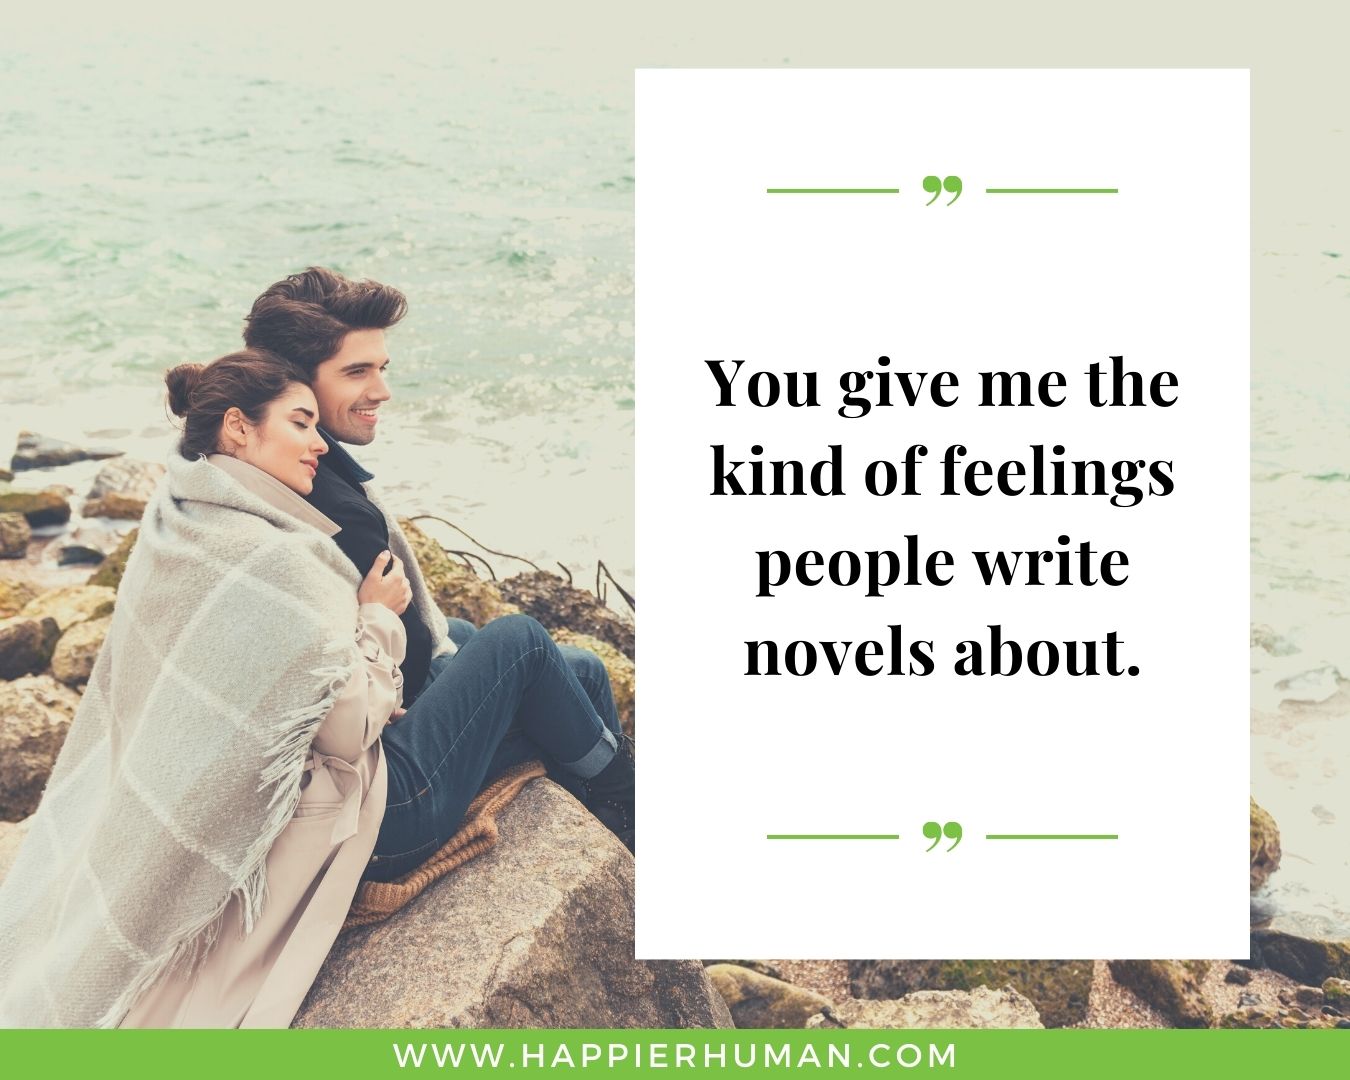 Loving Quotes for Her- “You give me the kind of feelings people write novels about.”